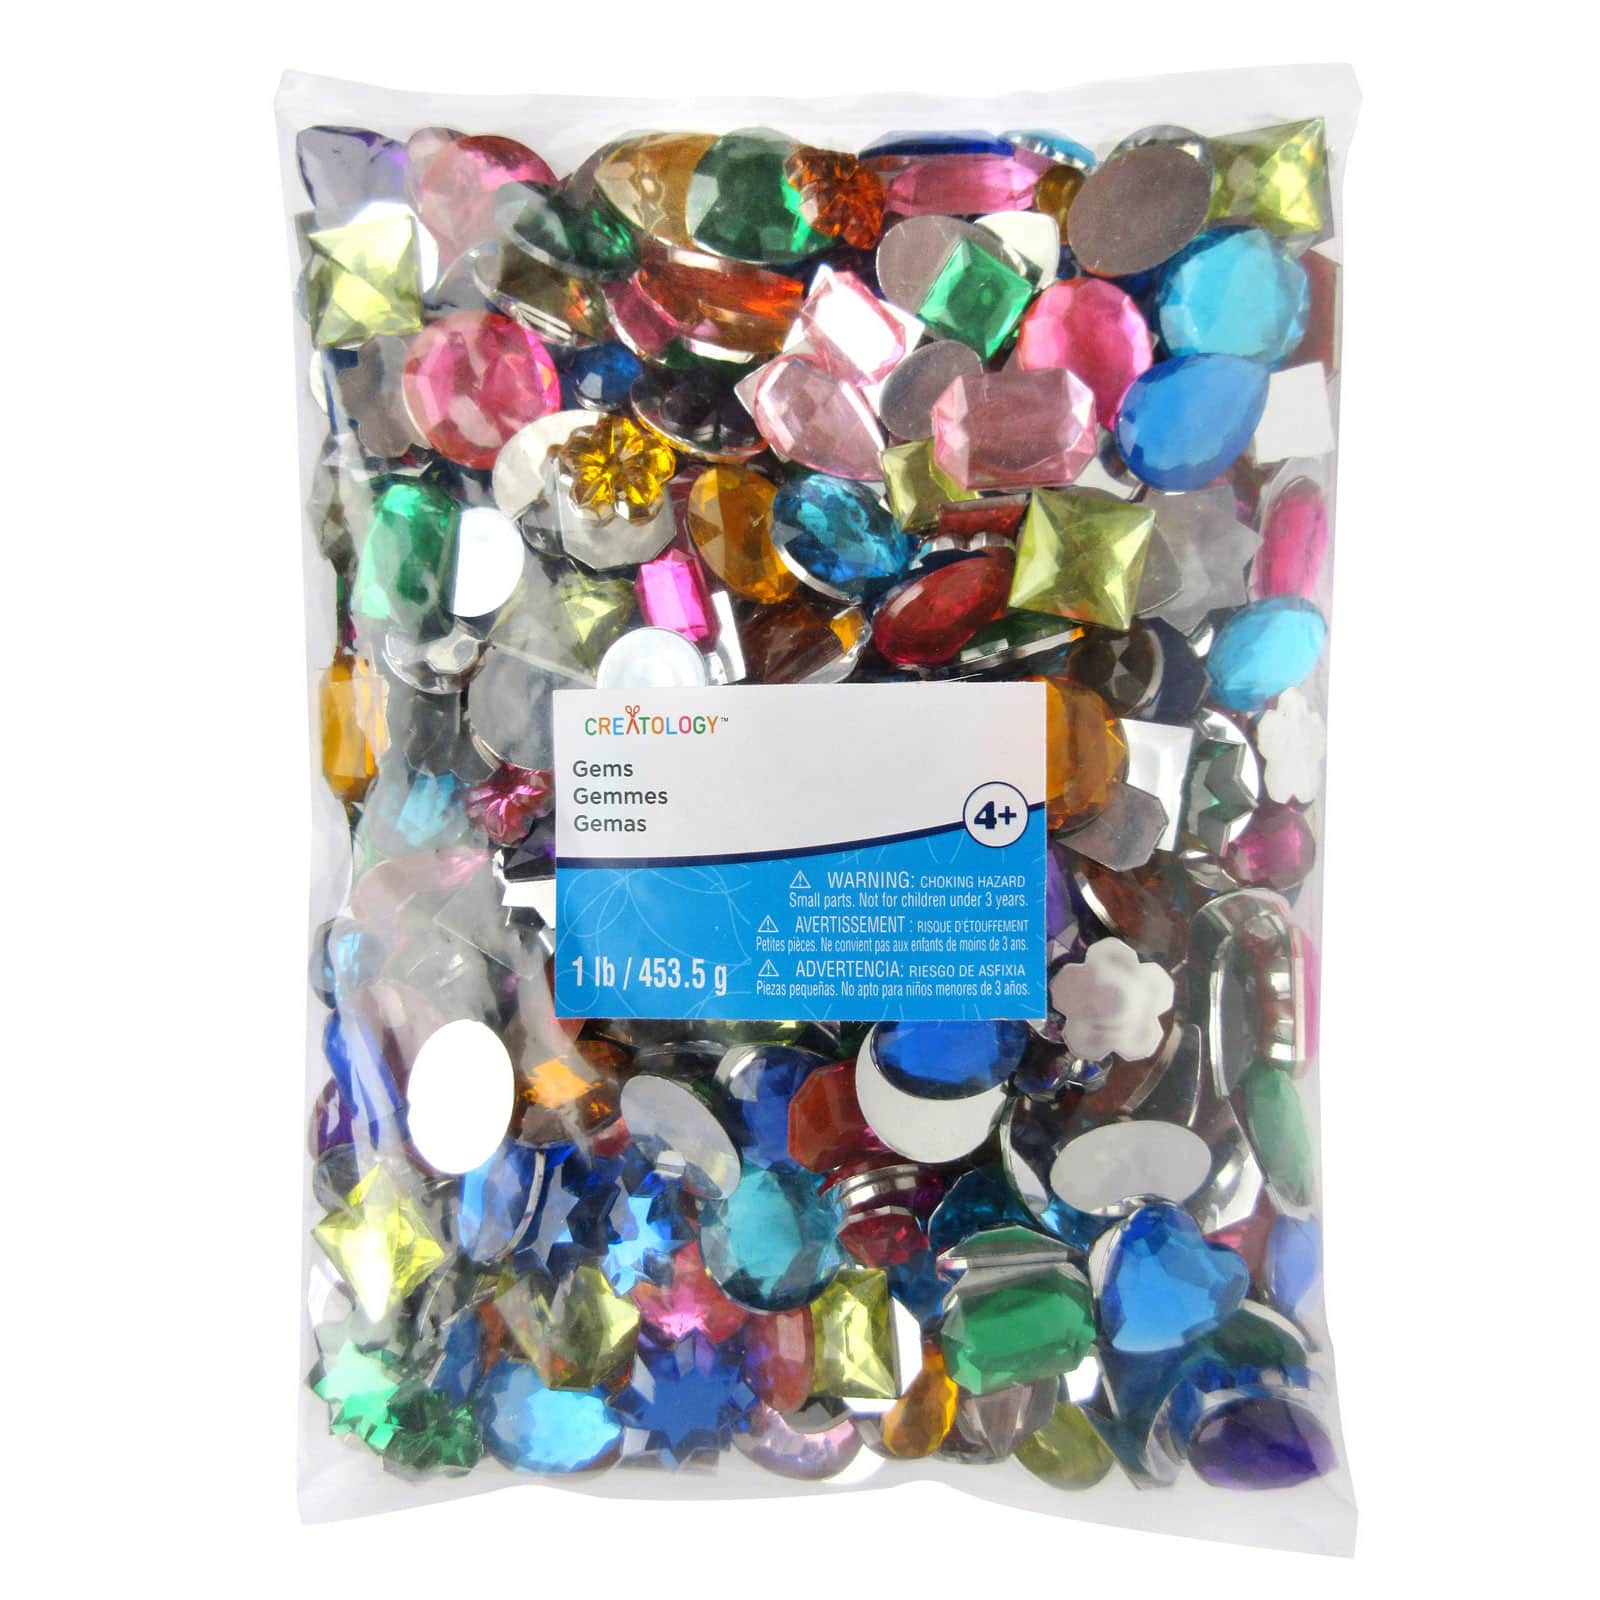 Allstarco Assorted Crafting Sew on Gems Pack Over 700 Pieces